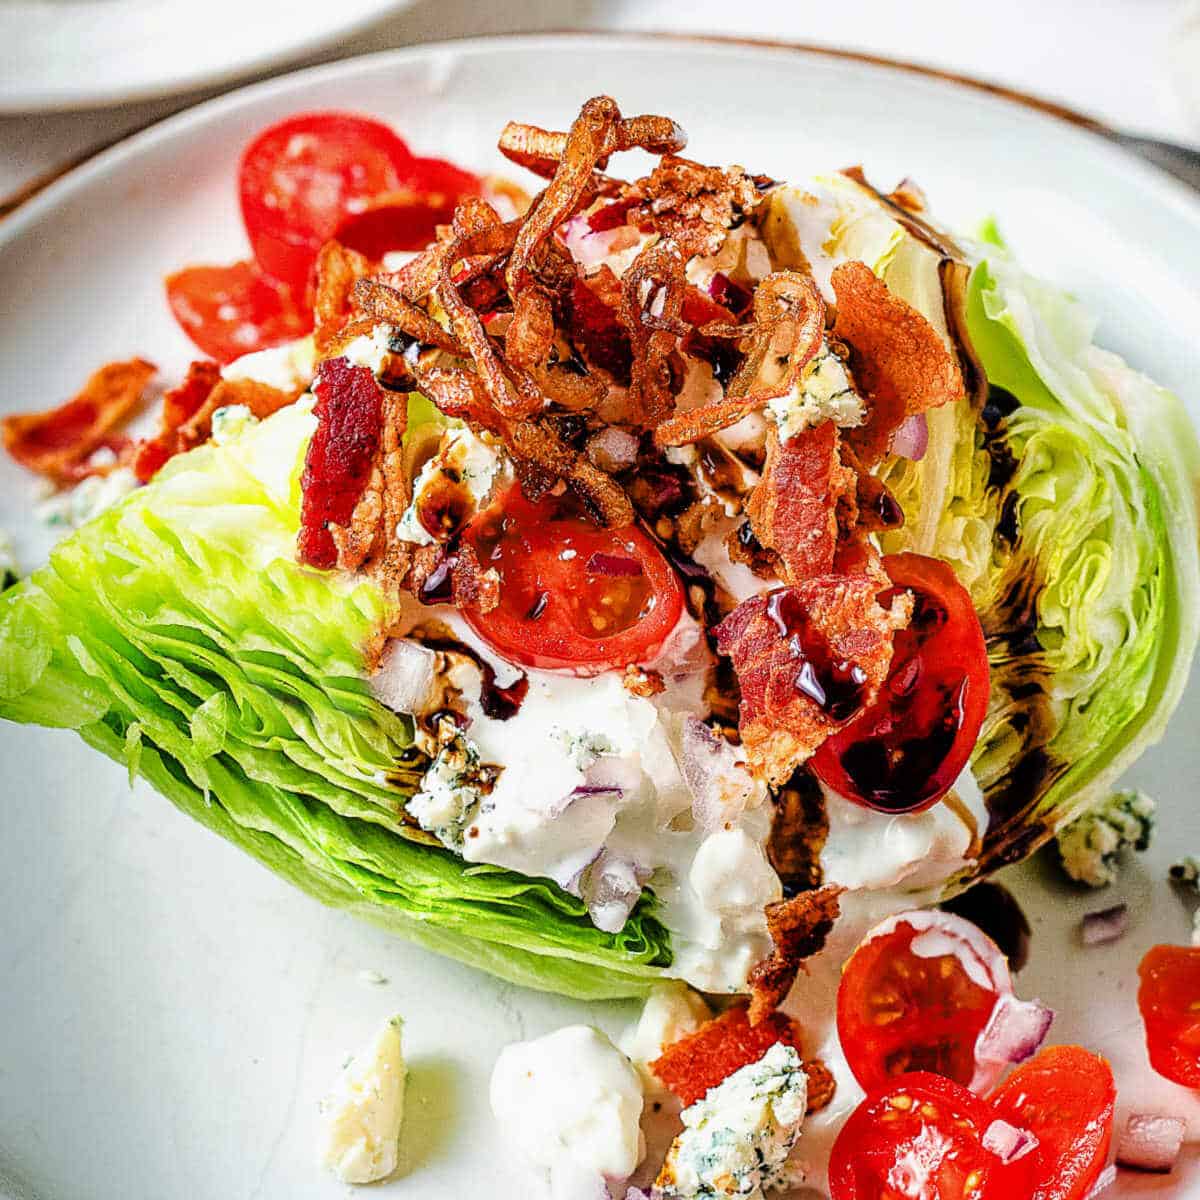 Classic Blue Cheese and Bacon Wedge Salad